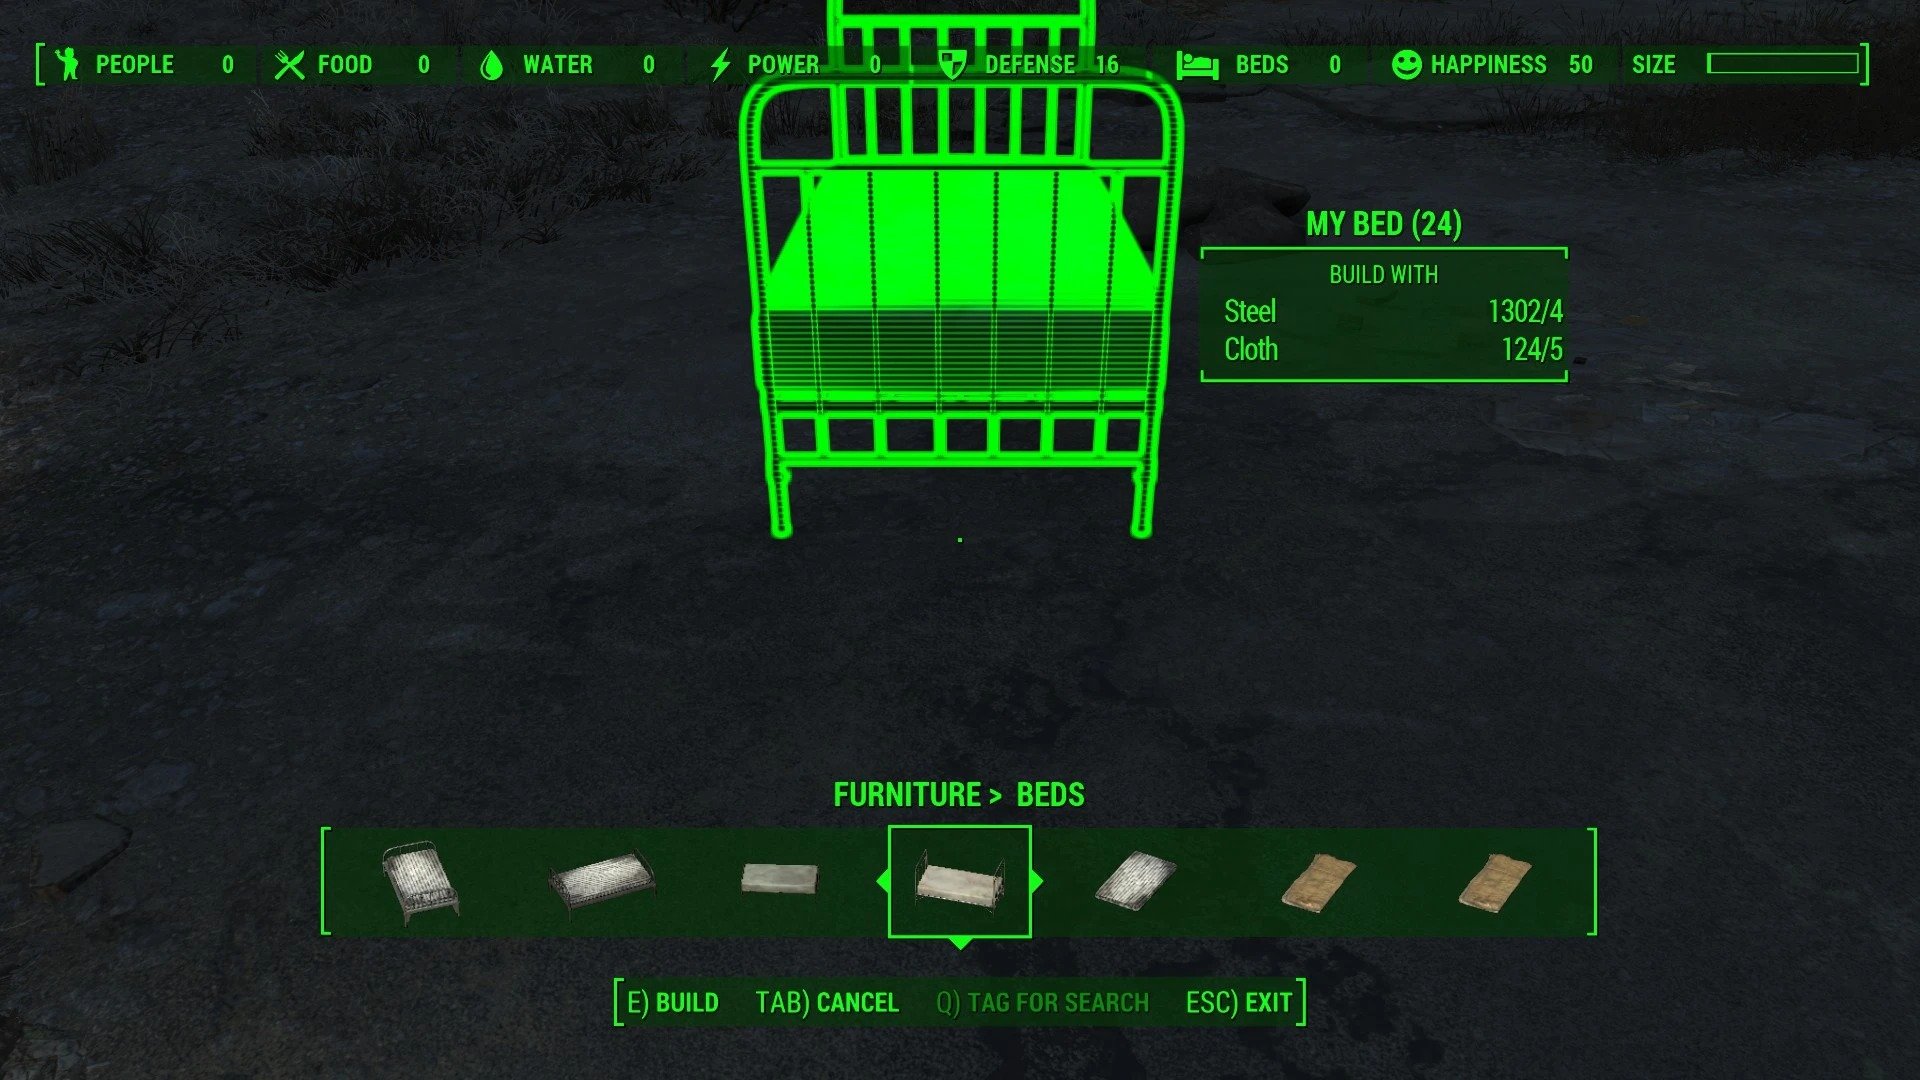 This is my bed fallout 4